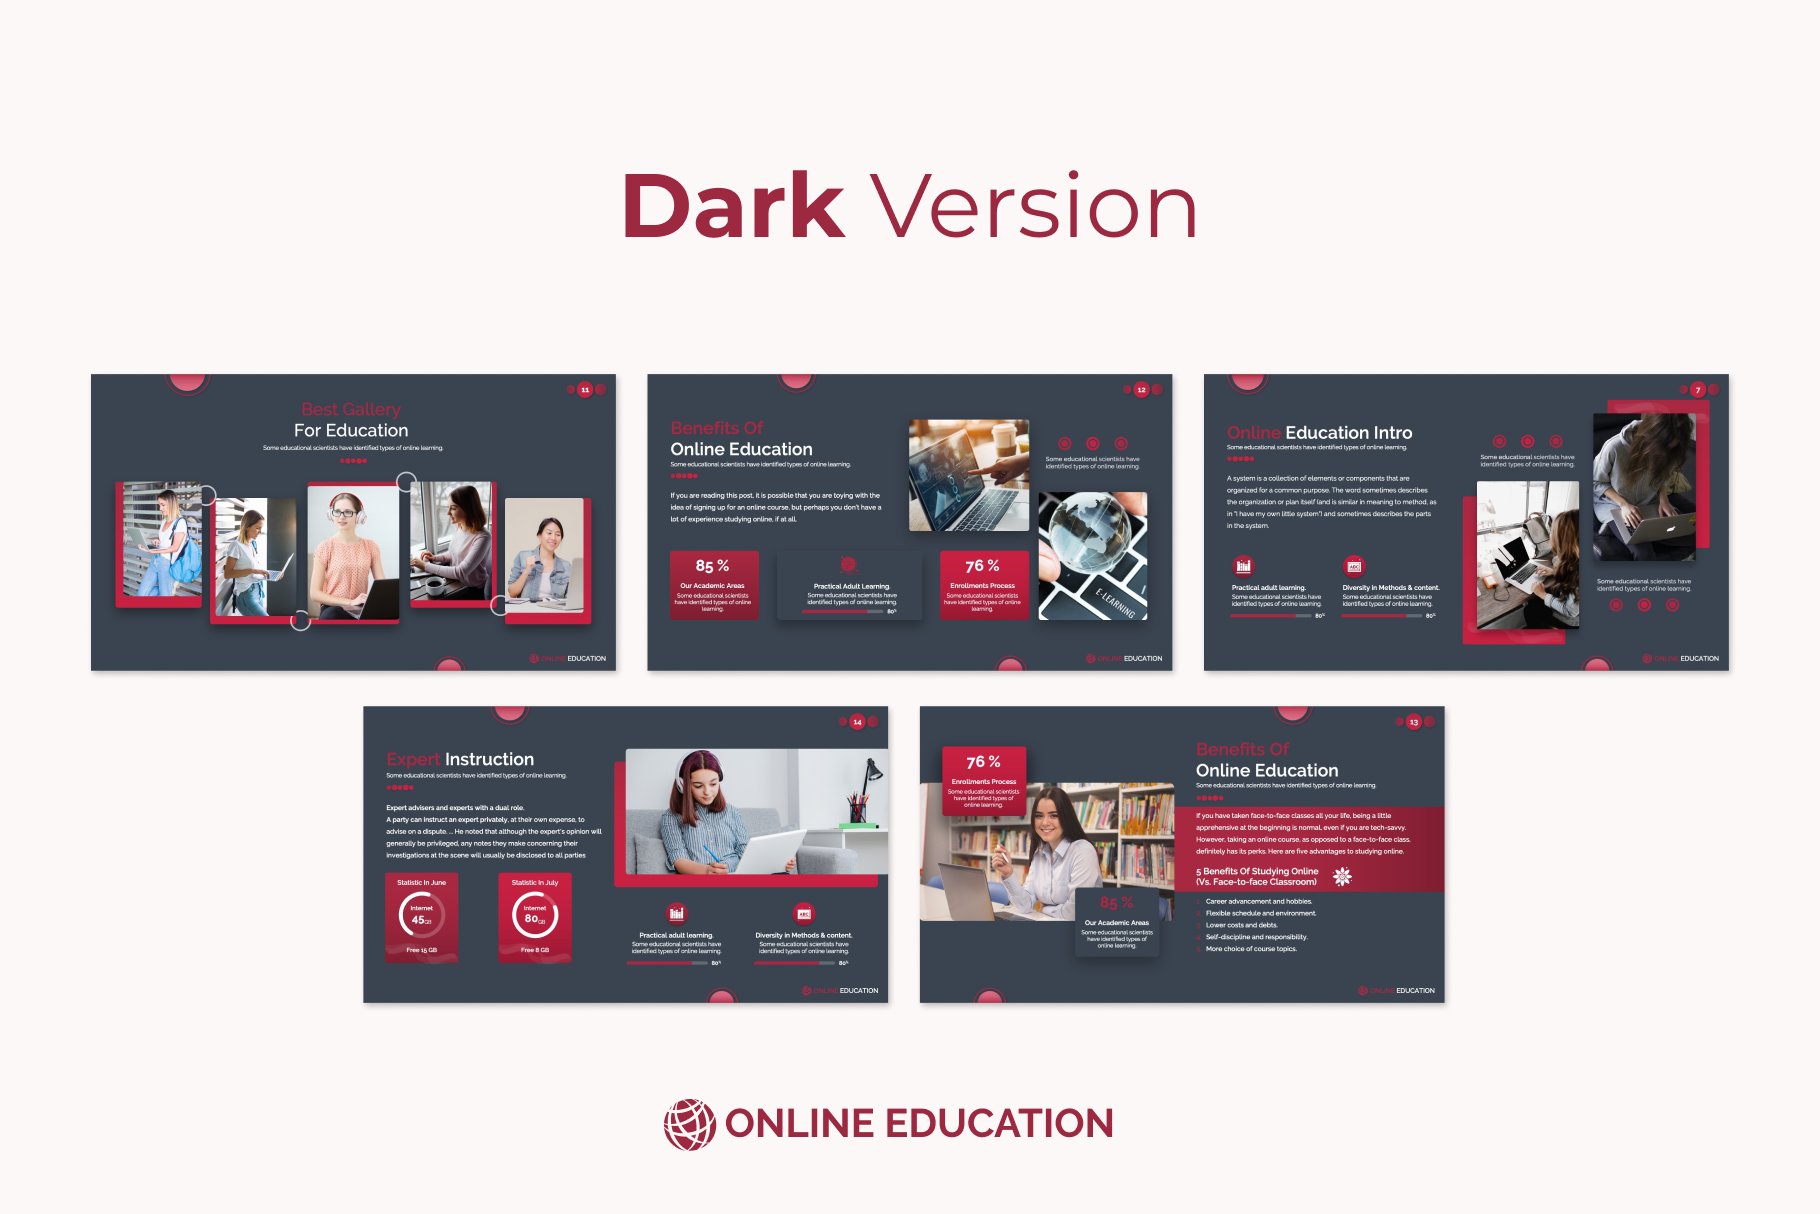 Dark version of the Online Education template.